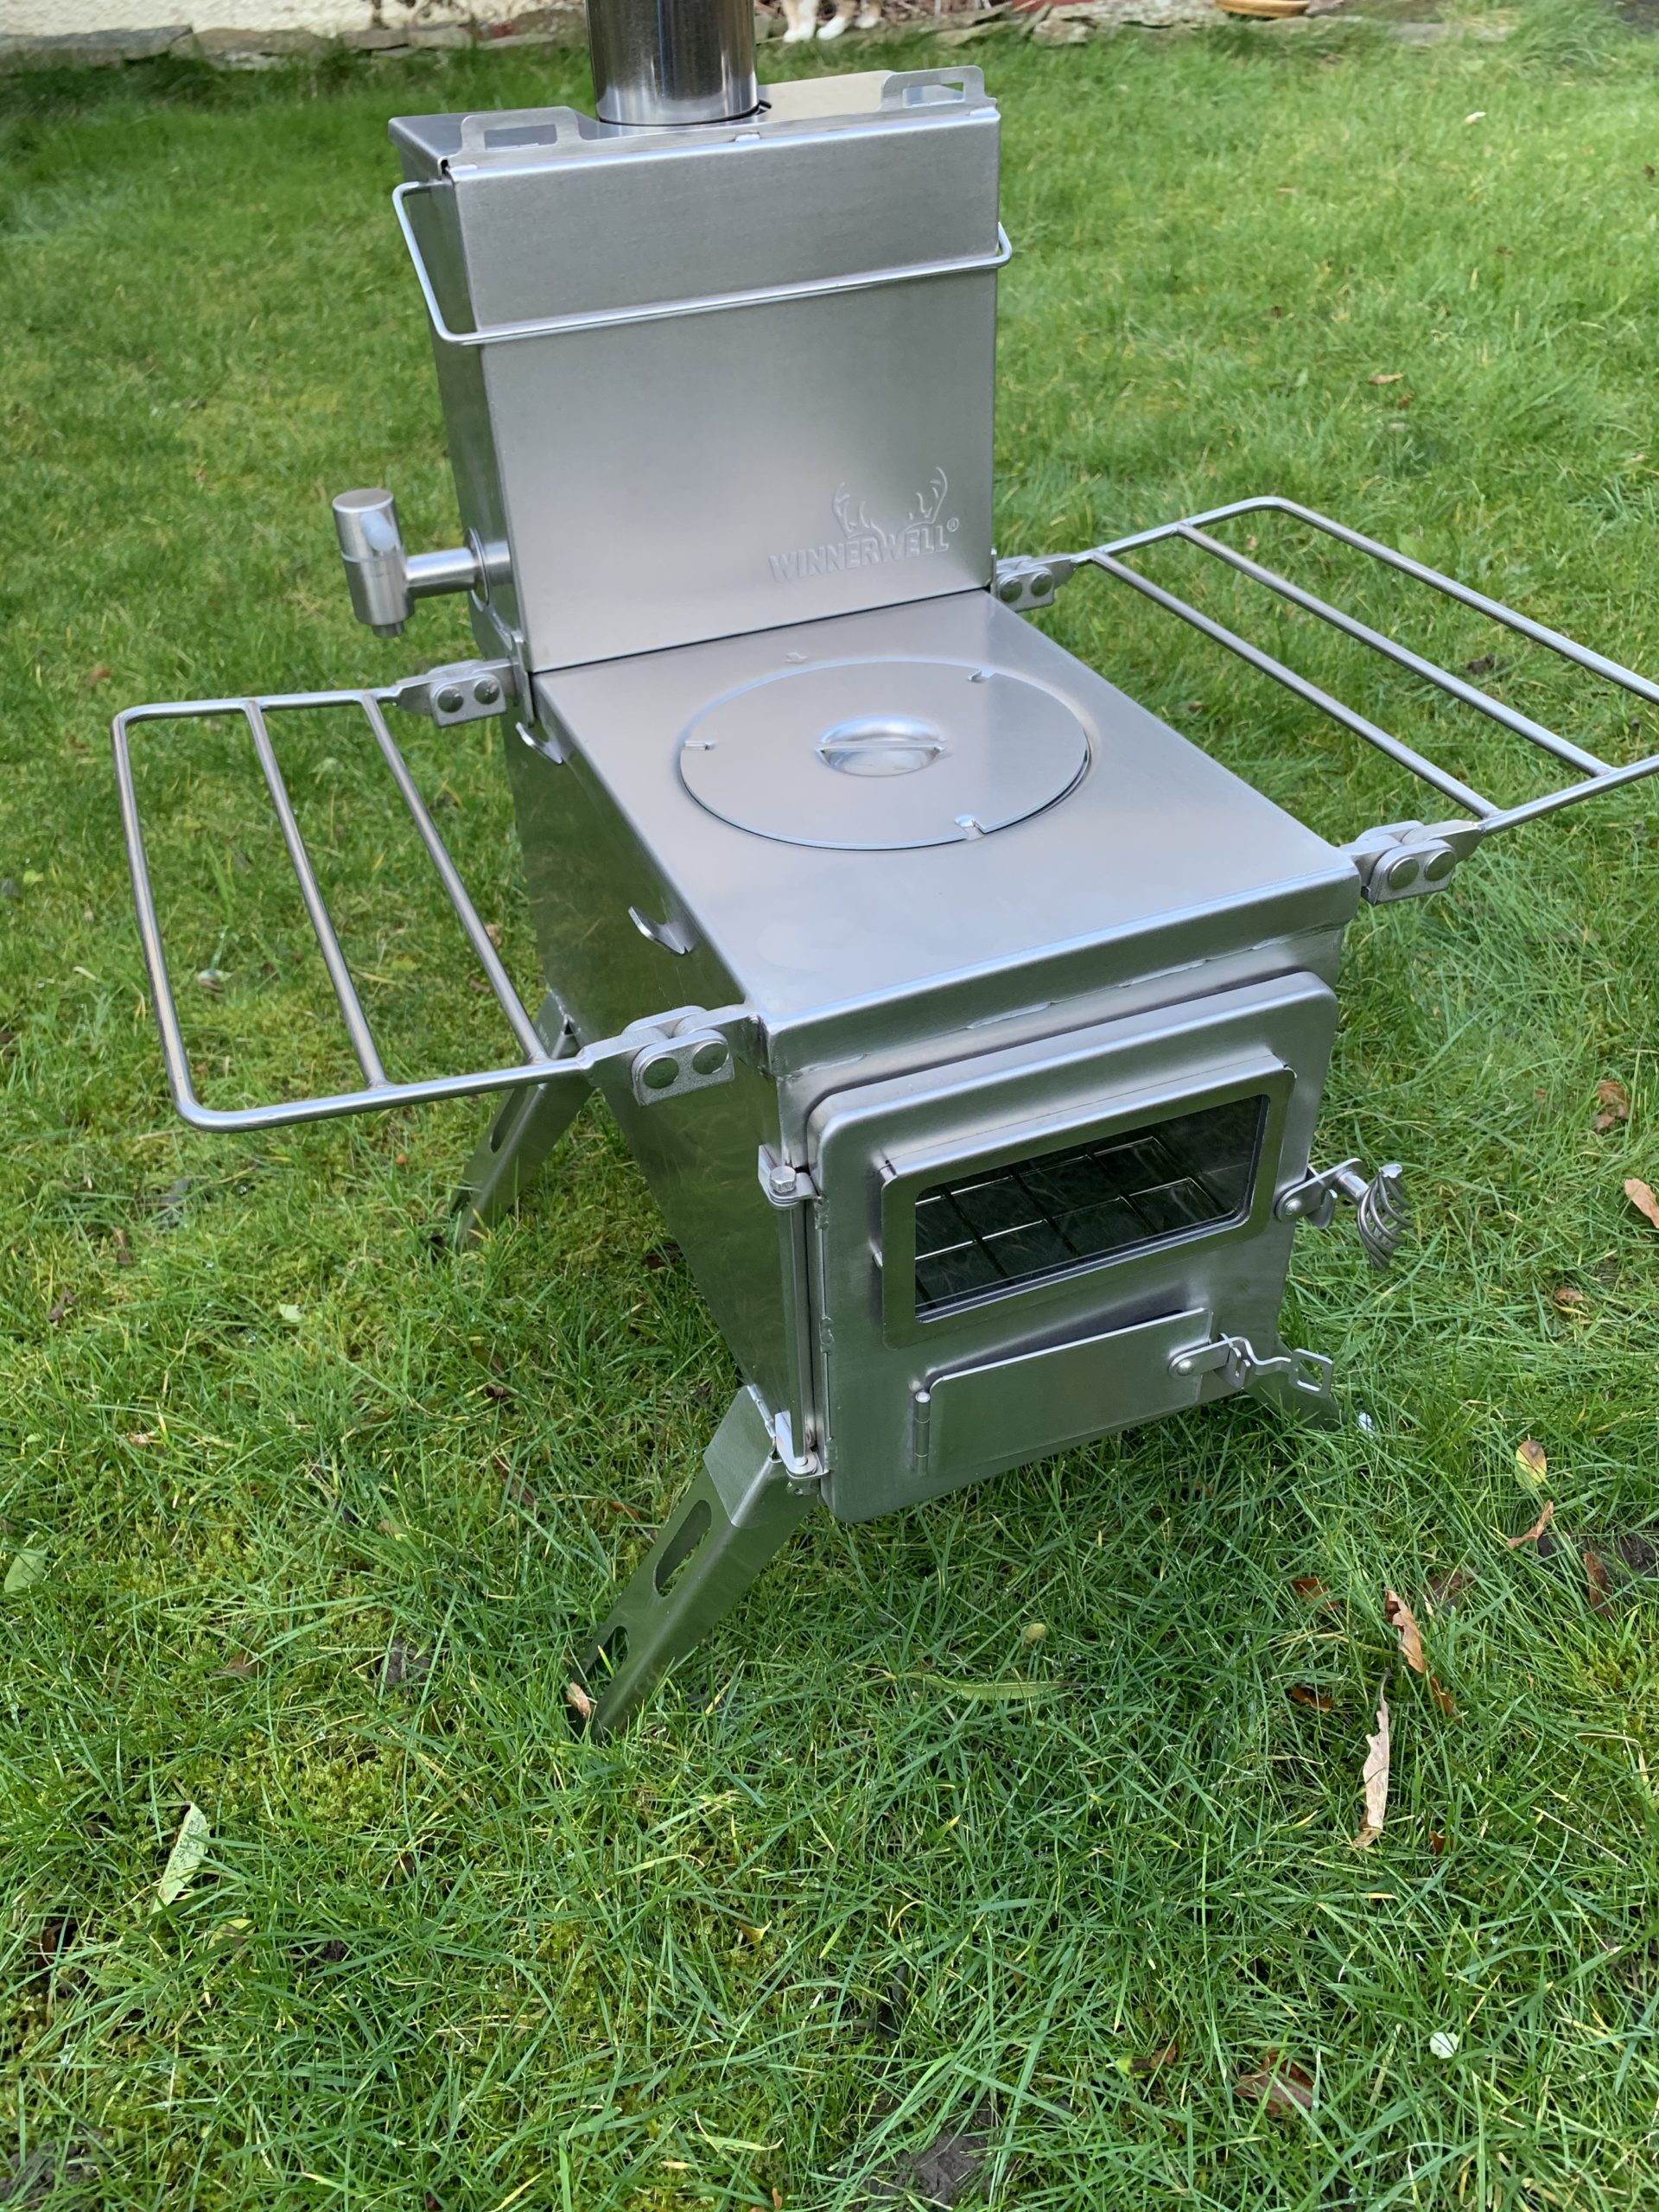 Winnerwell Nomad Wood Burning Camping Cooker & Stove - Review